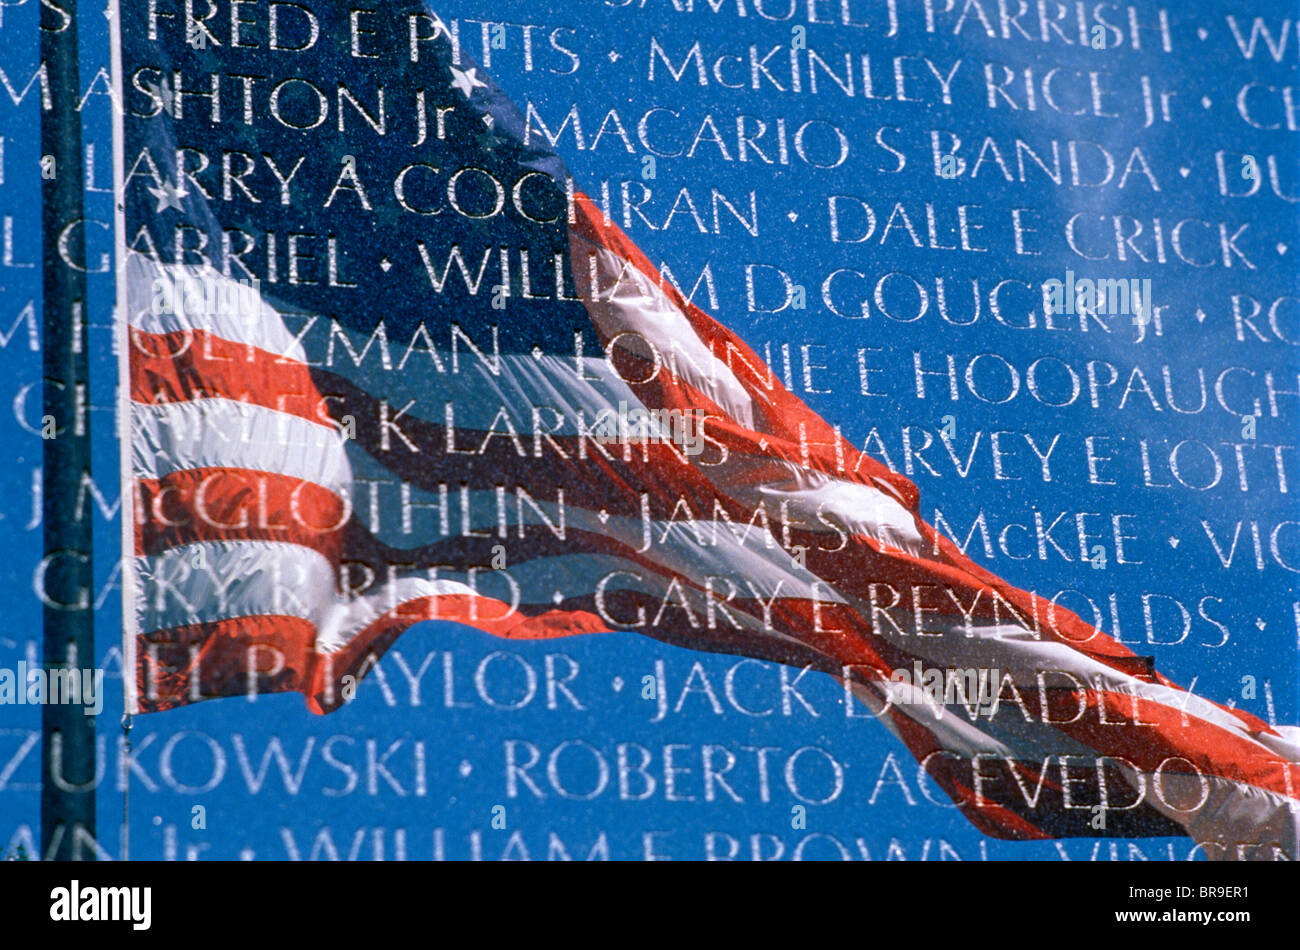 1960s 1970s 1980s AMERICAN FLAG REFLECTED IN WALL OF VIETNAM VETERANS MEMORIAL WASHINGTON DC USA Stock Photo